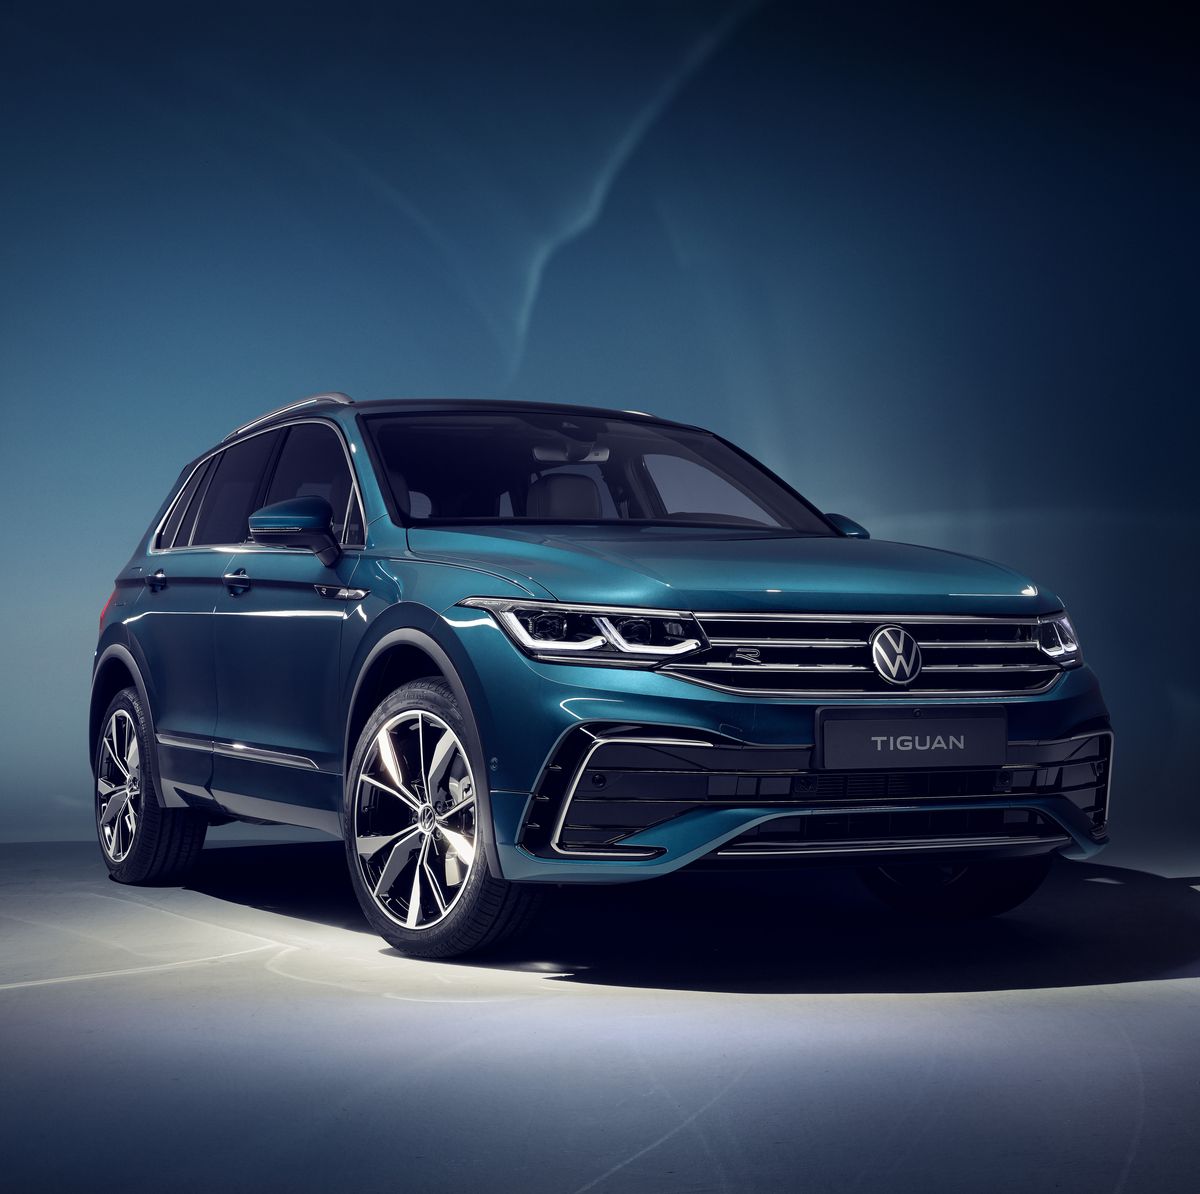 2022 Volkswagen Tiguan Has a More Appealing New Front End